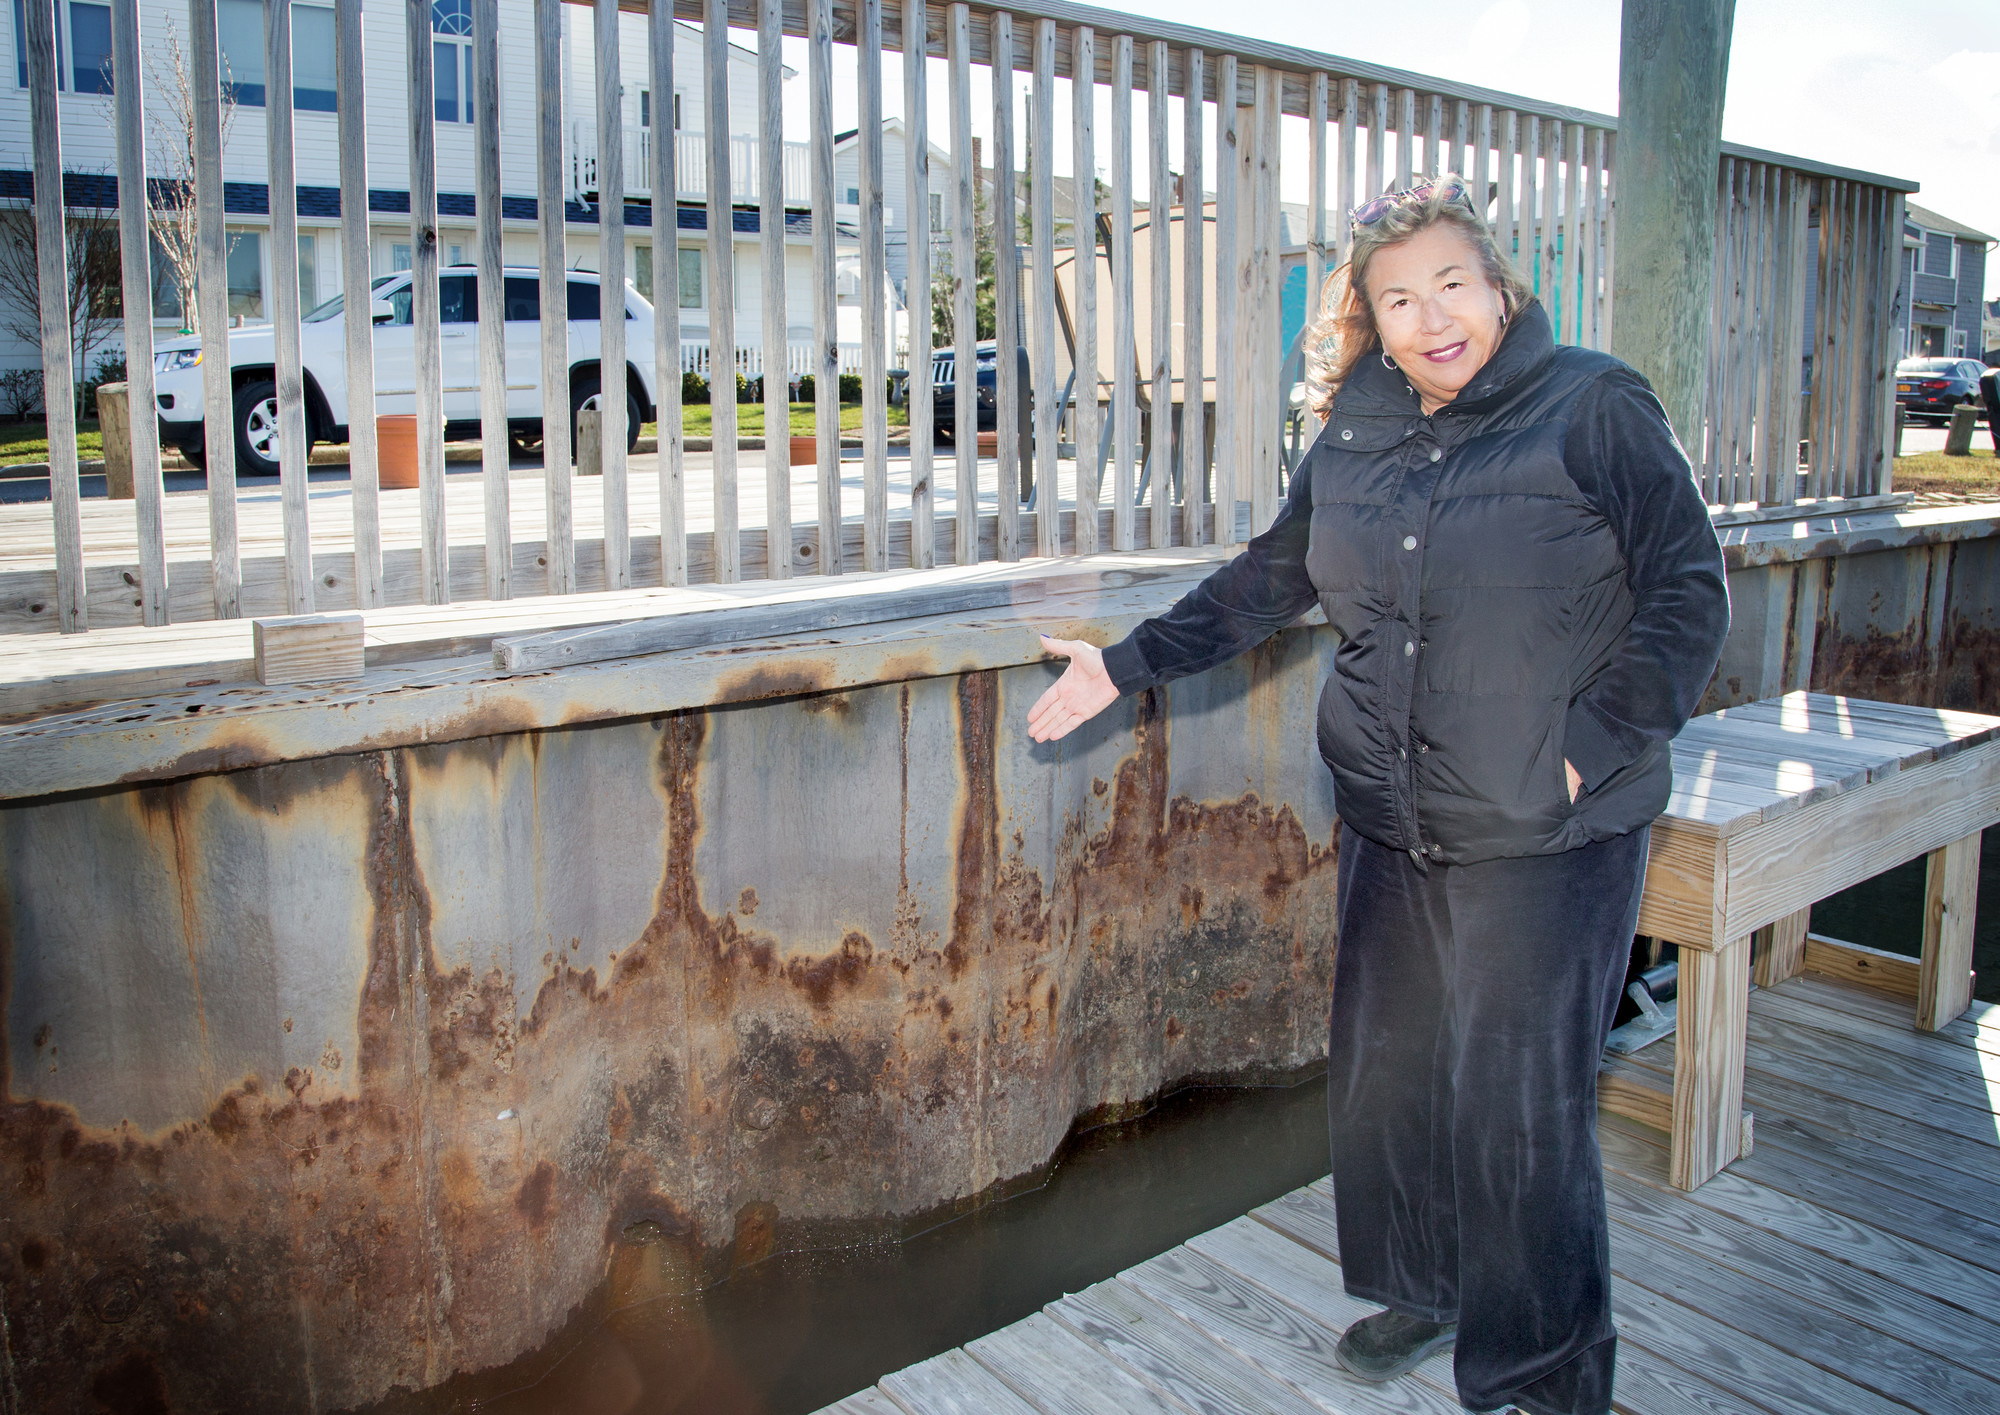 Heron Street resident Nan Beilinson in front of the eroding bulkheads last month. She said she hopes that a uniform bulkheading project and other flood mitigation measures move forward quickly. Photo by Kristie Arden/Herald